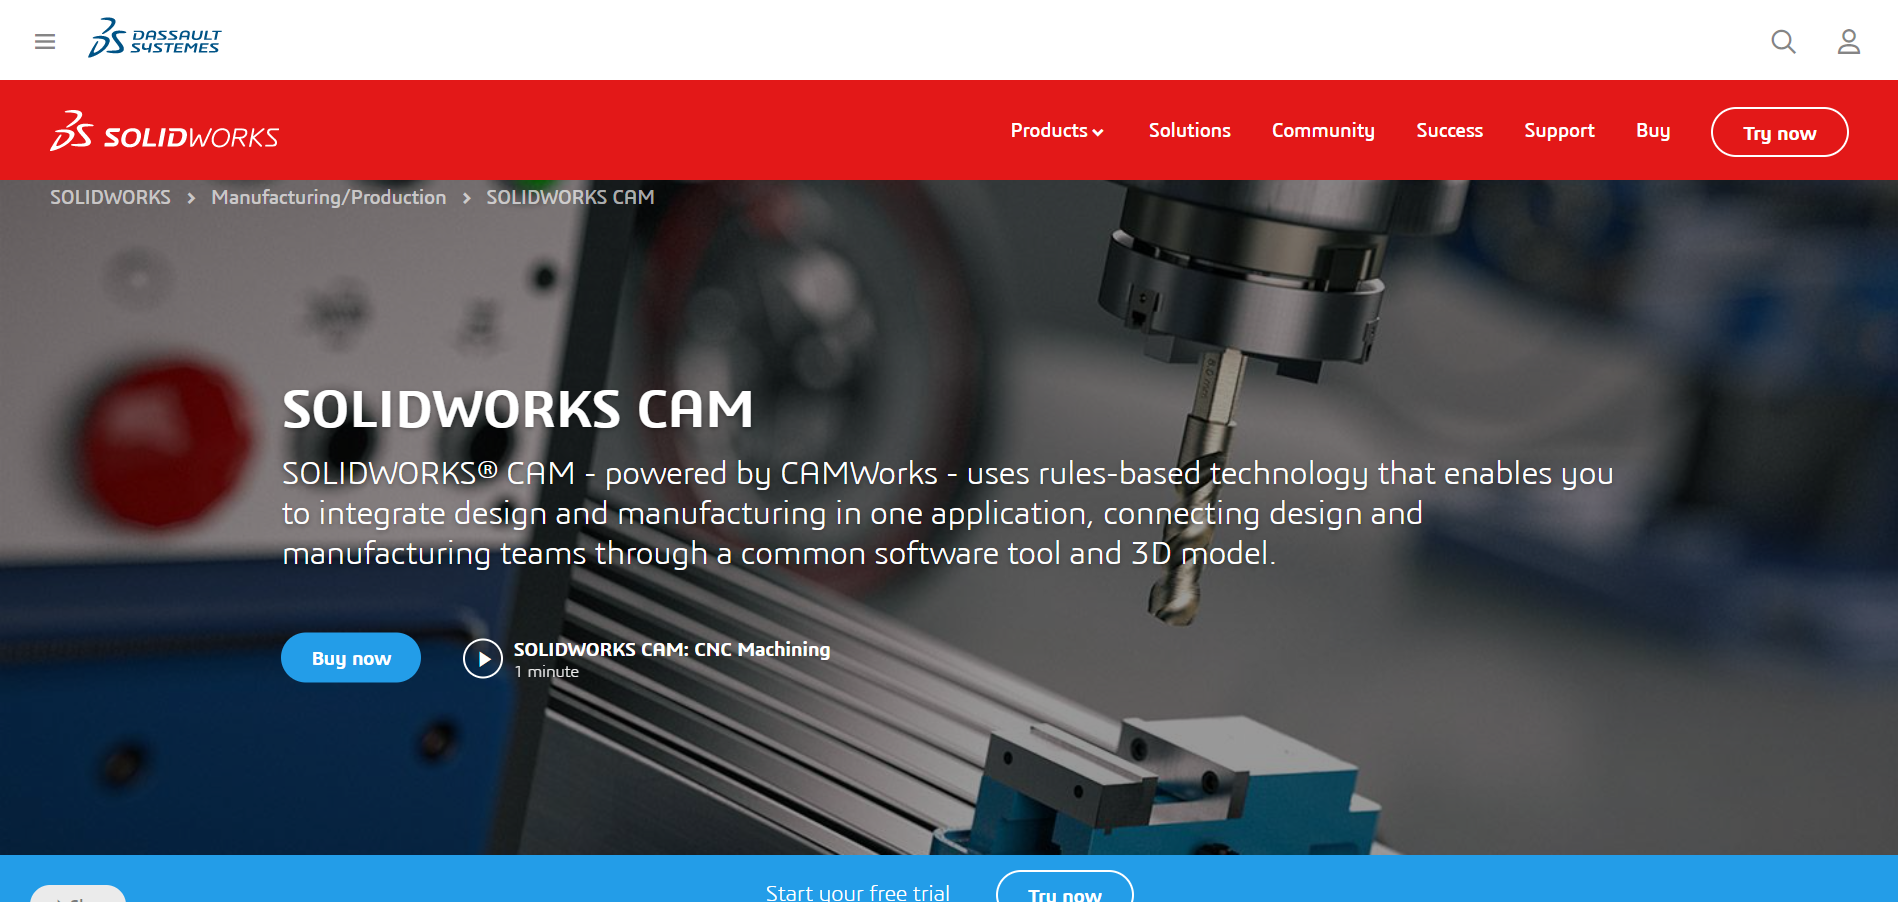 SOLIDWORKS CAM main page